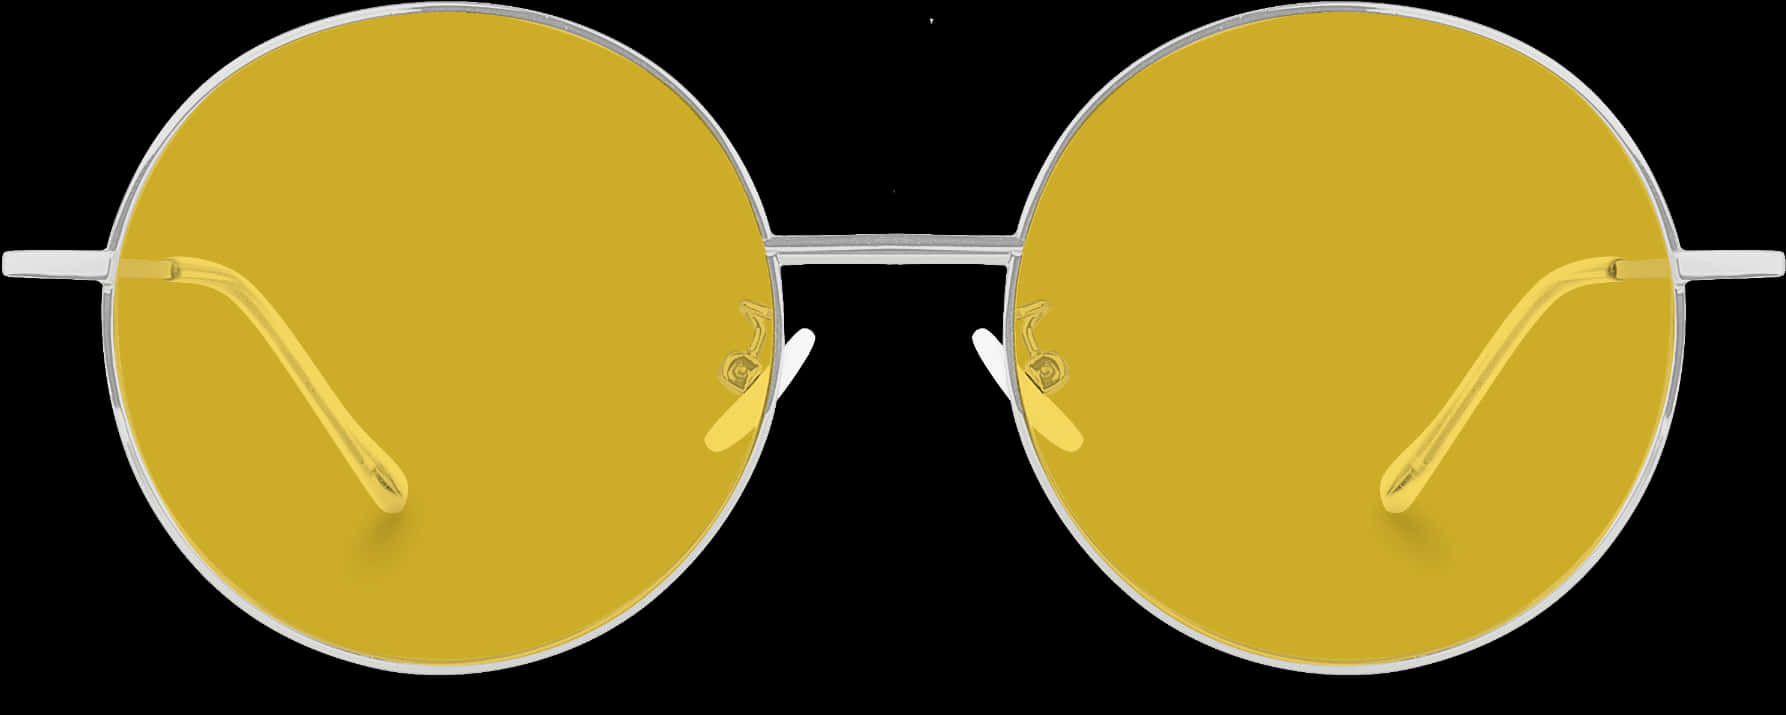 A Pair Of Sunglasses With Yellow Lenses